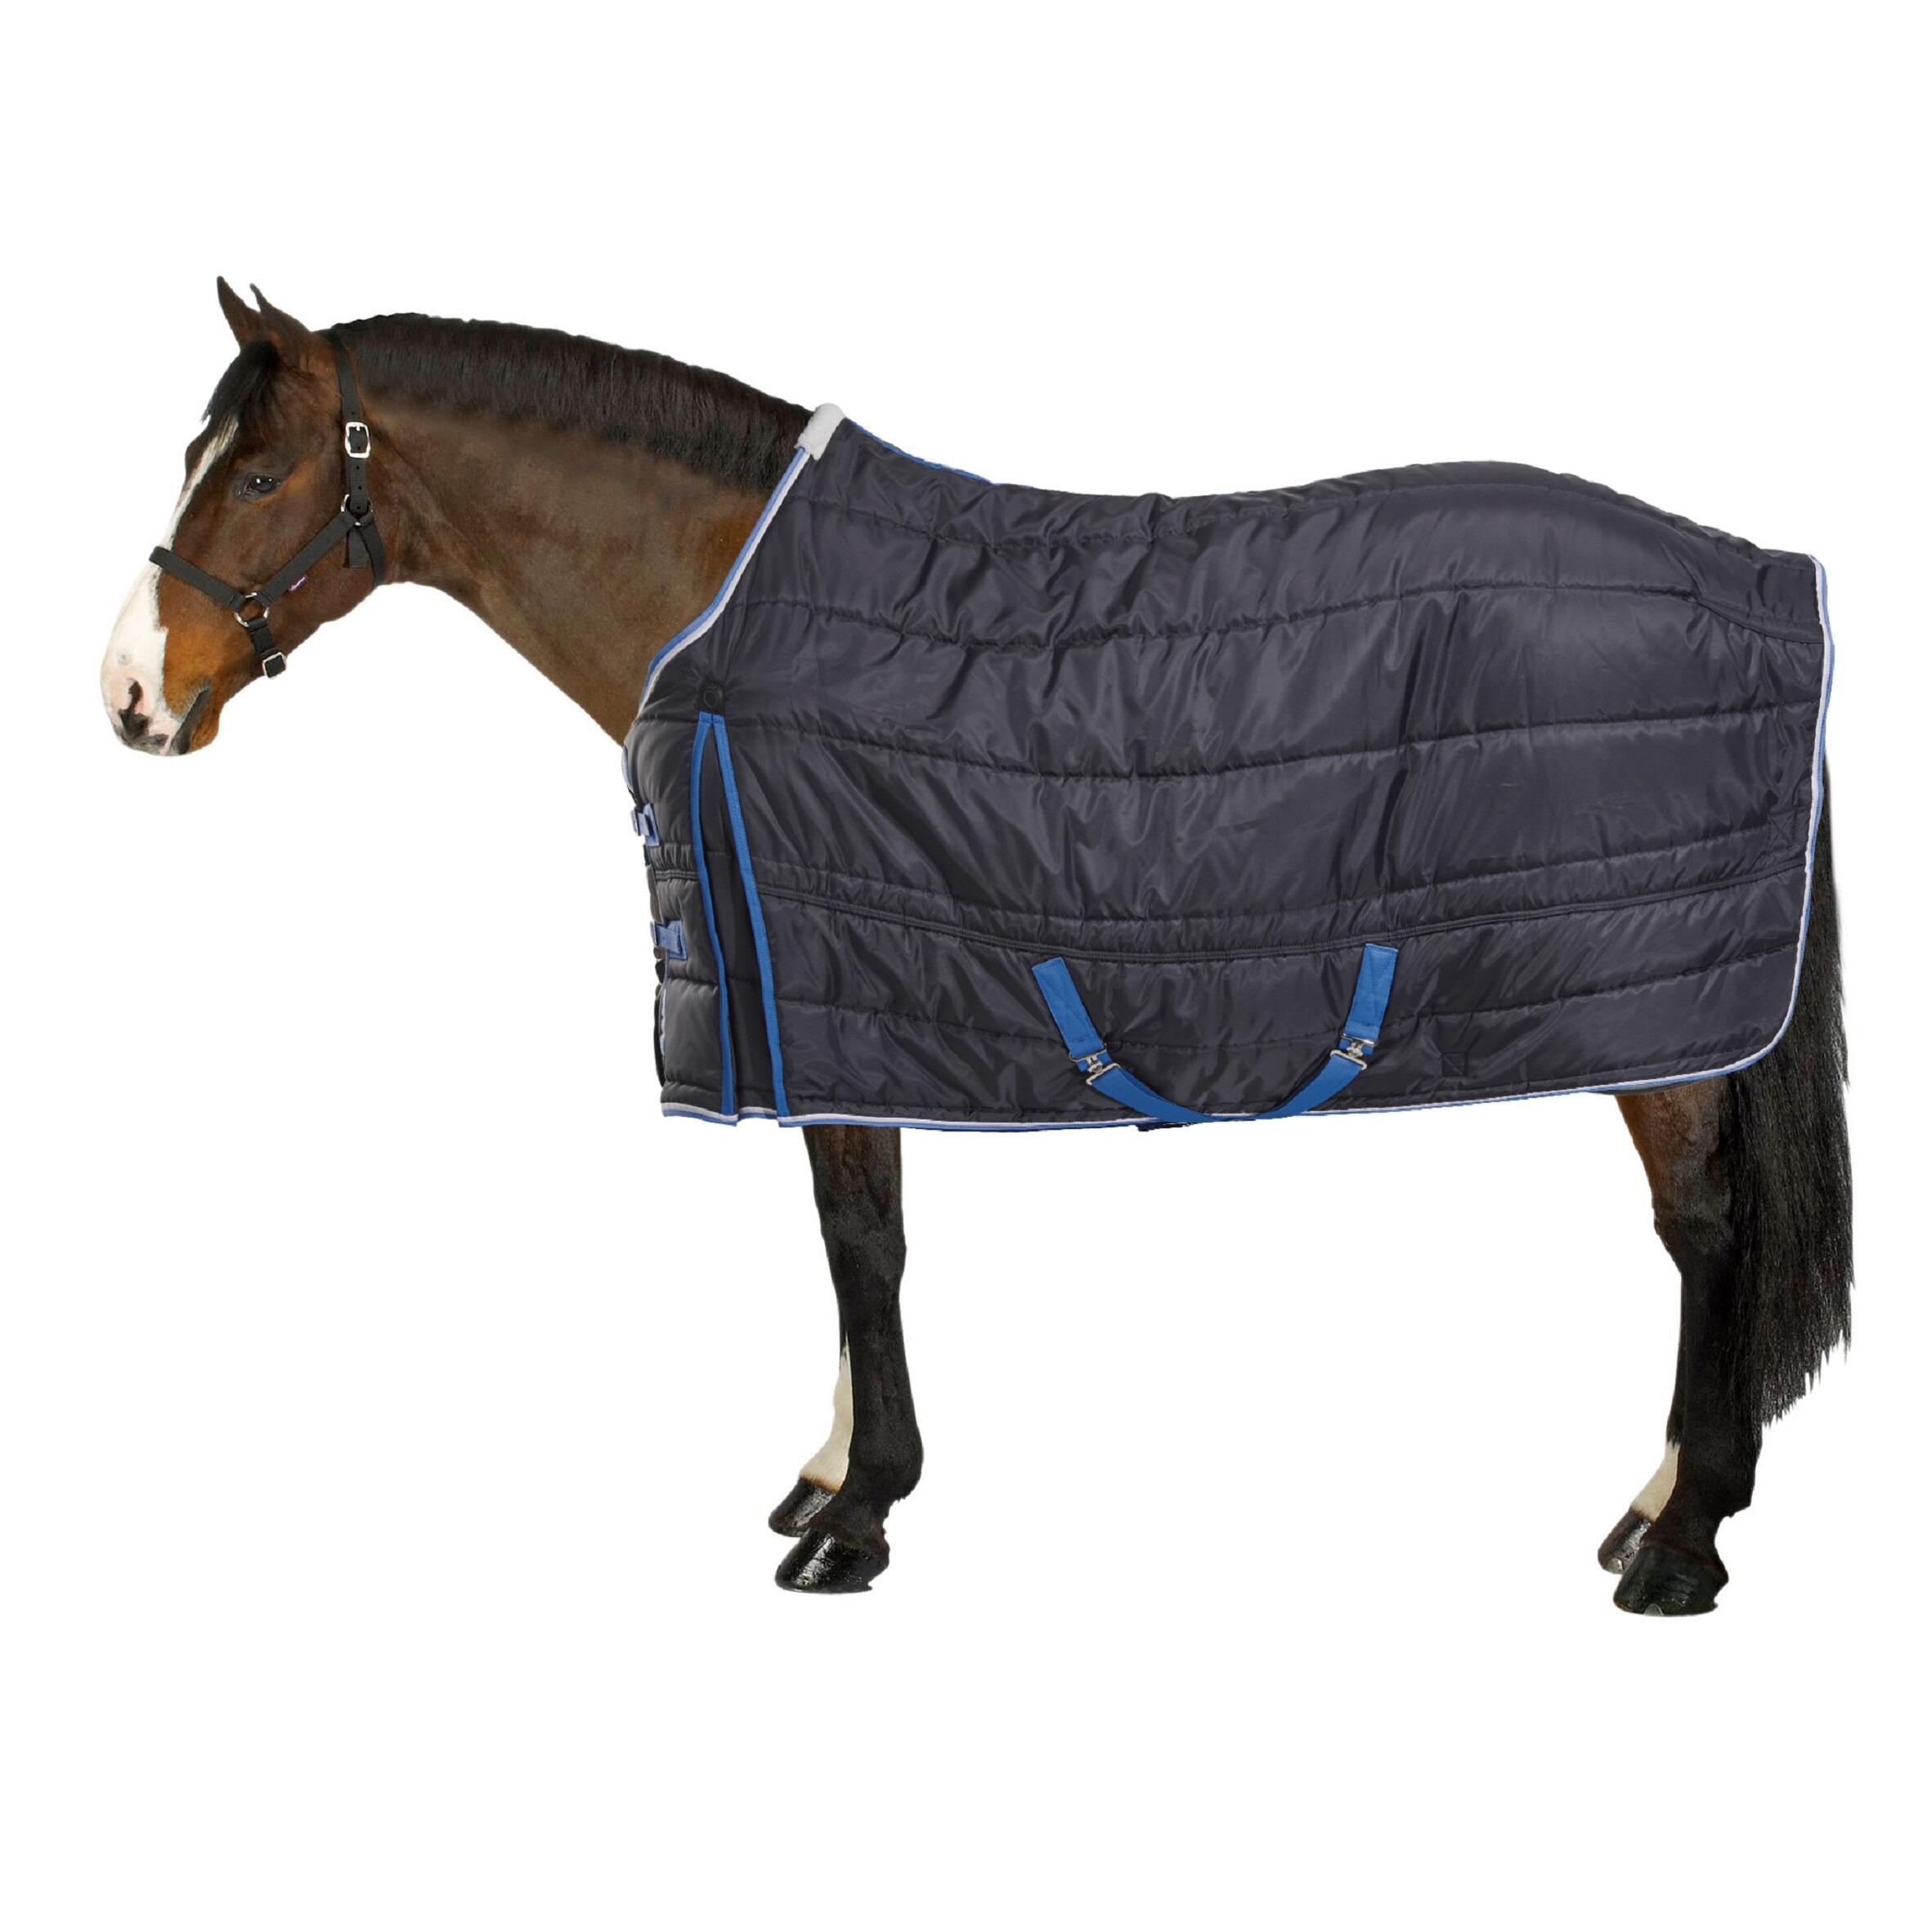 FOUGANZA Stable 200 Horse Riding Stable Rug for Horse and Pony - Navy